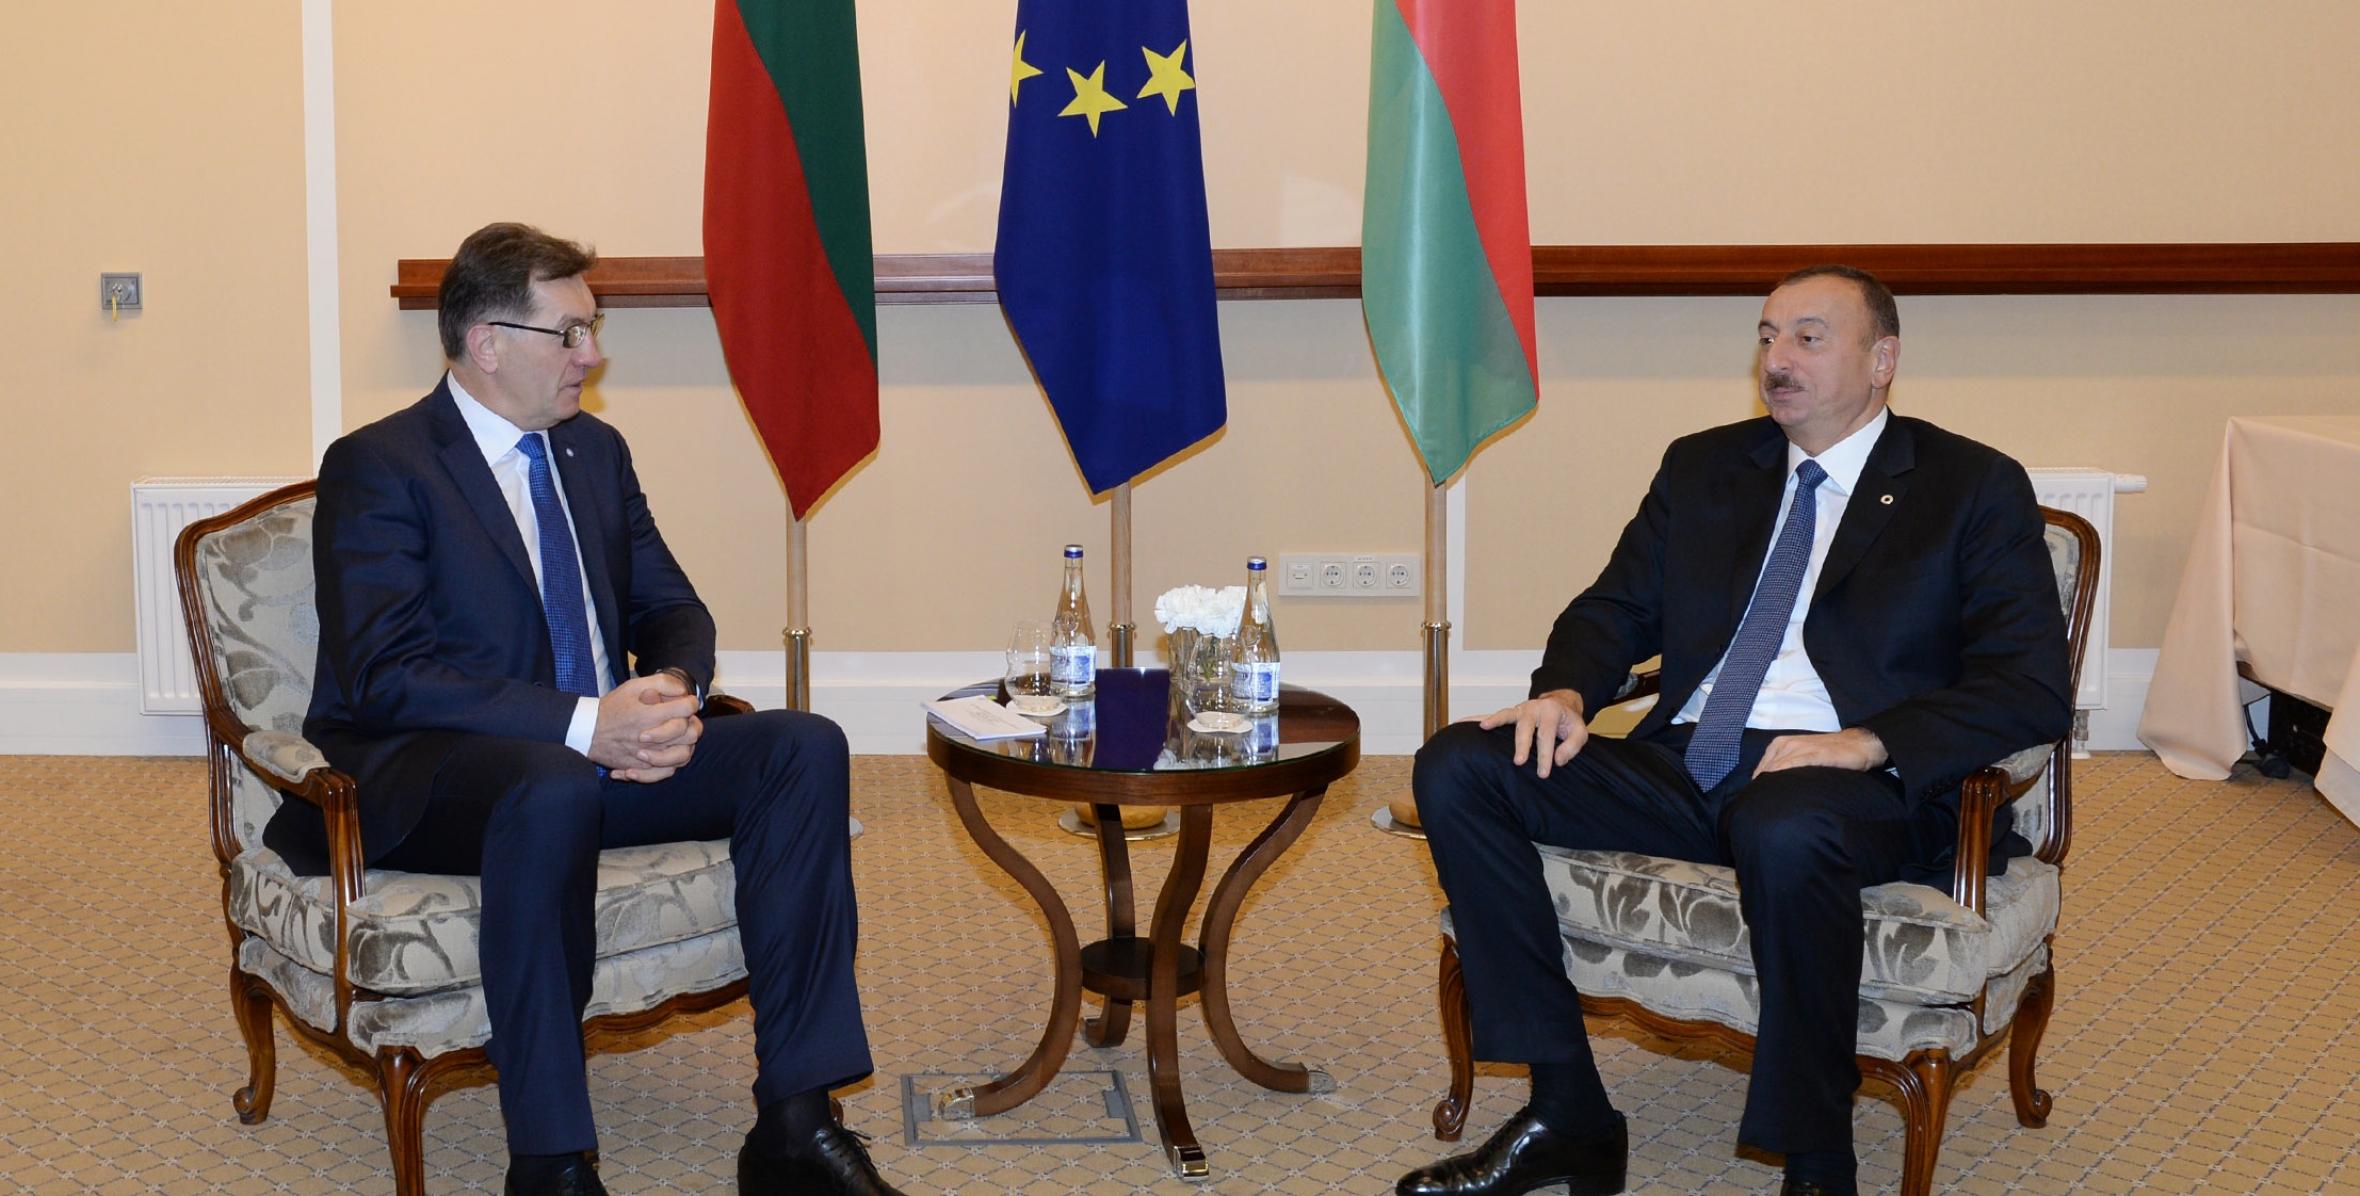 Ilham Aliyev has met with Lithuanian Prime Minister Algirdas Butkevicius